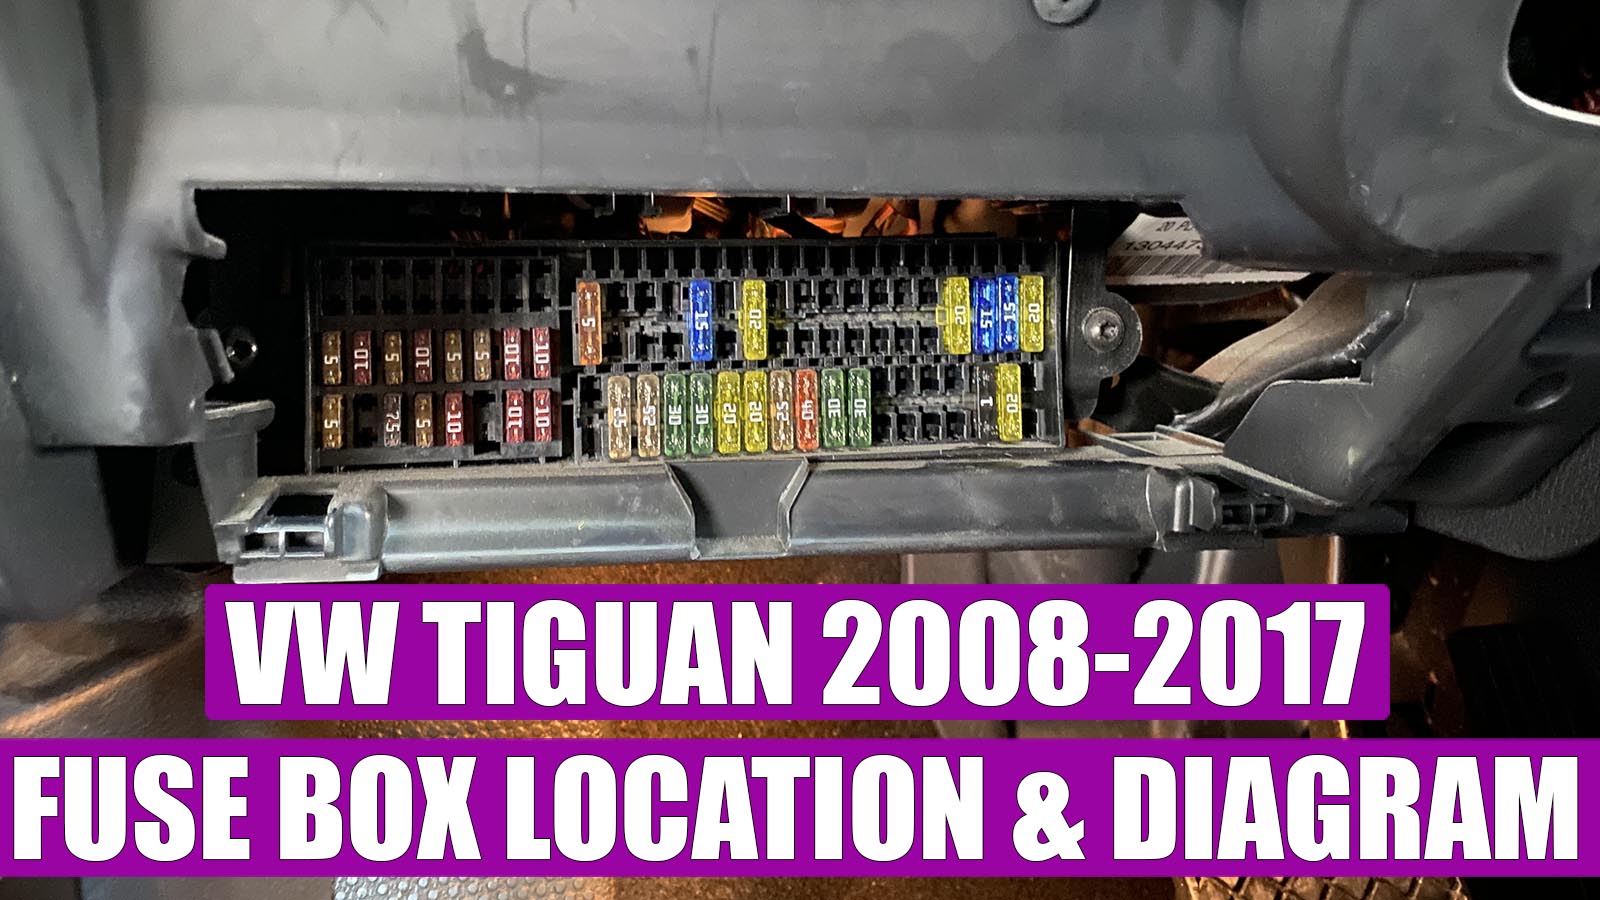 VW Tiguan 2008-2017 fuse box and relay panel location and diagram